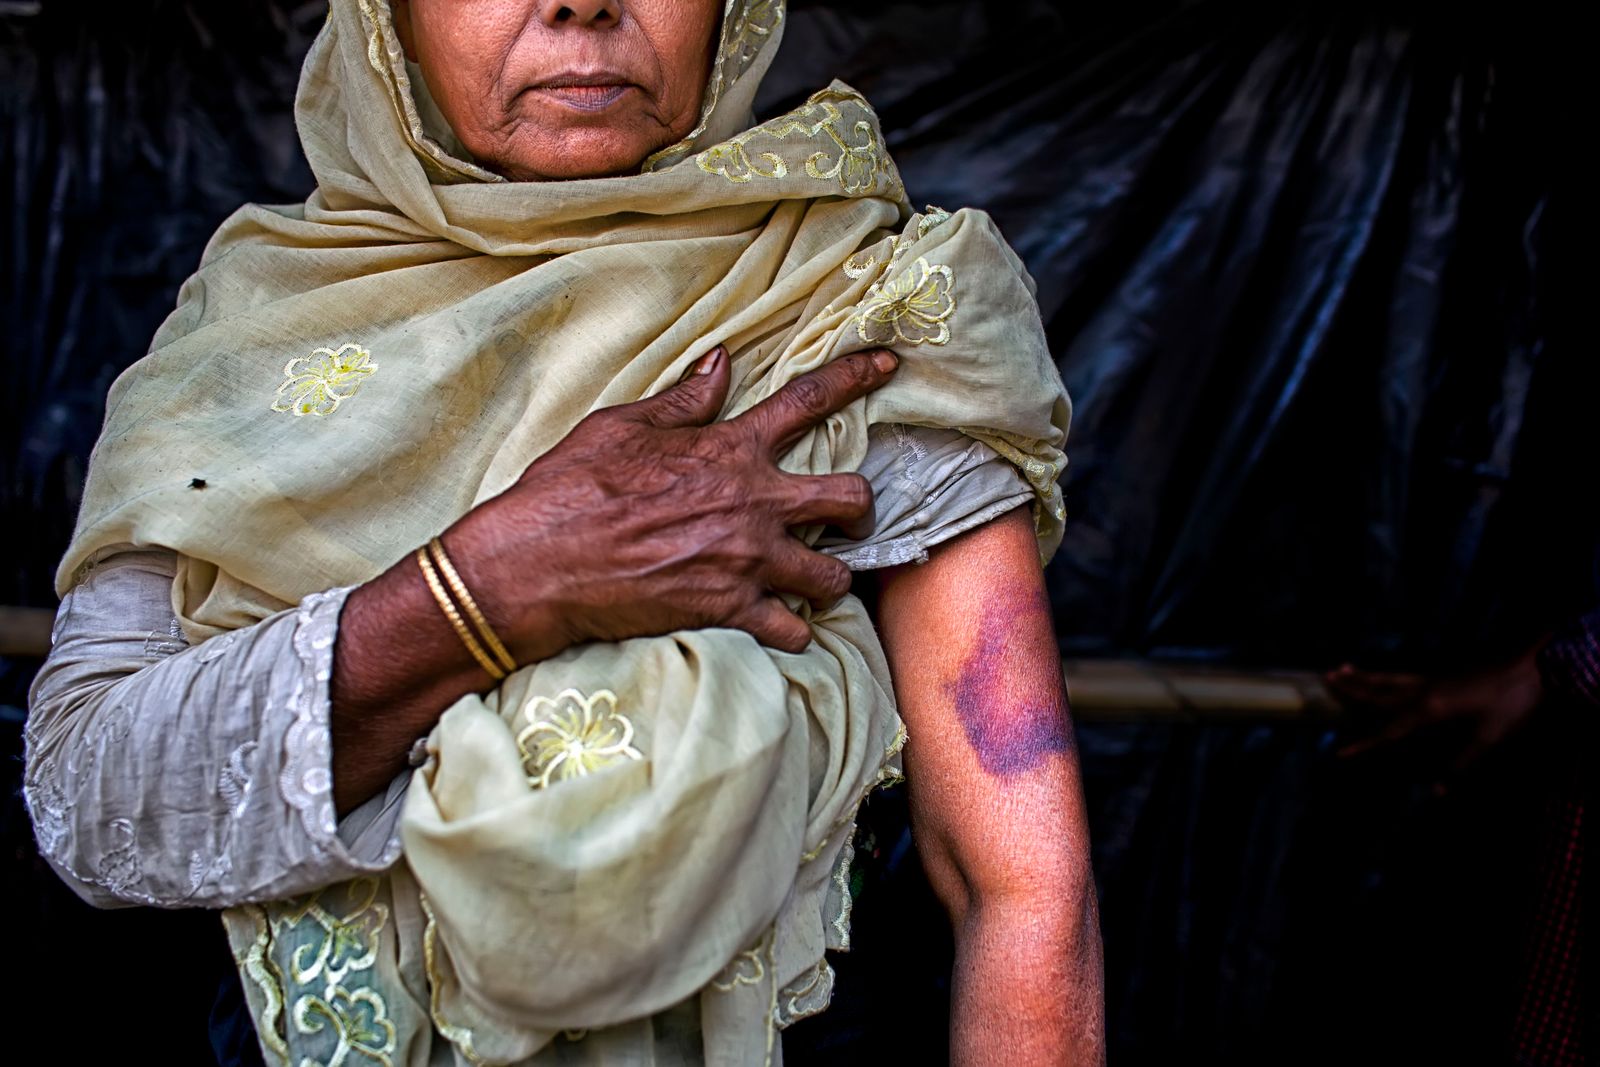 © K. M. Asad - Image from the Rohingya Refugee in Bangladesh photography project